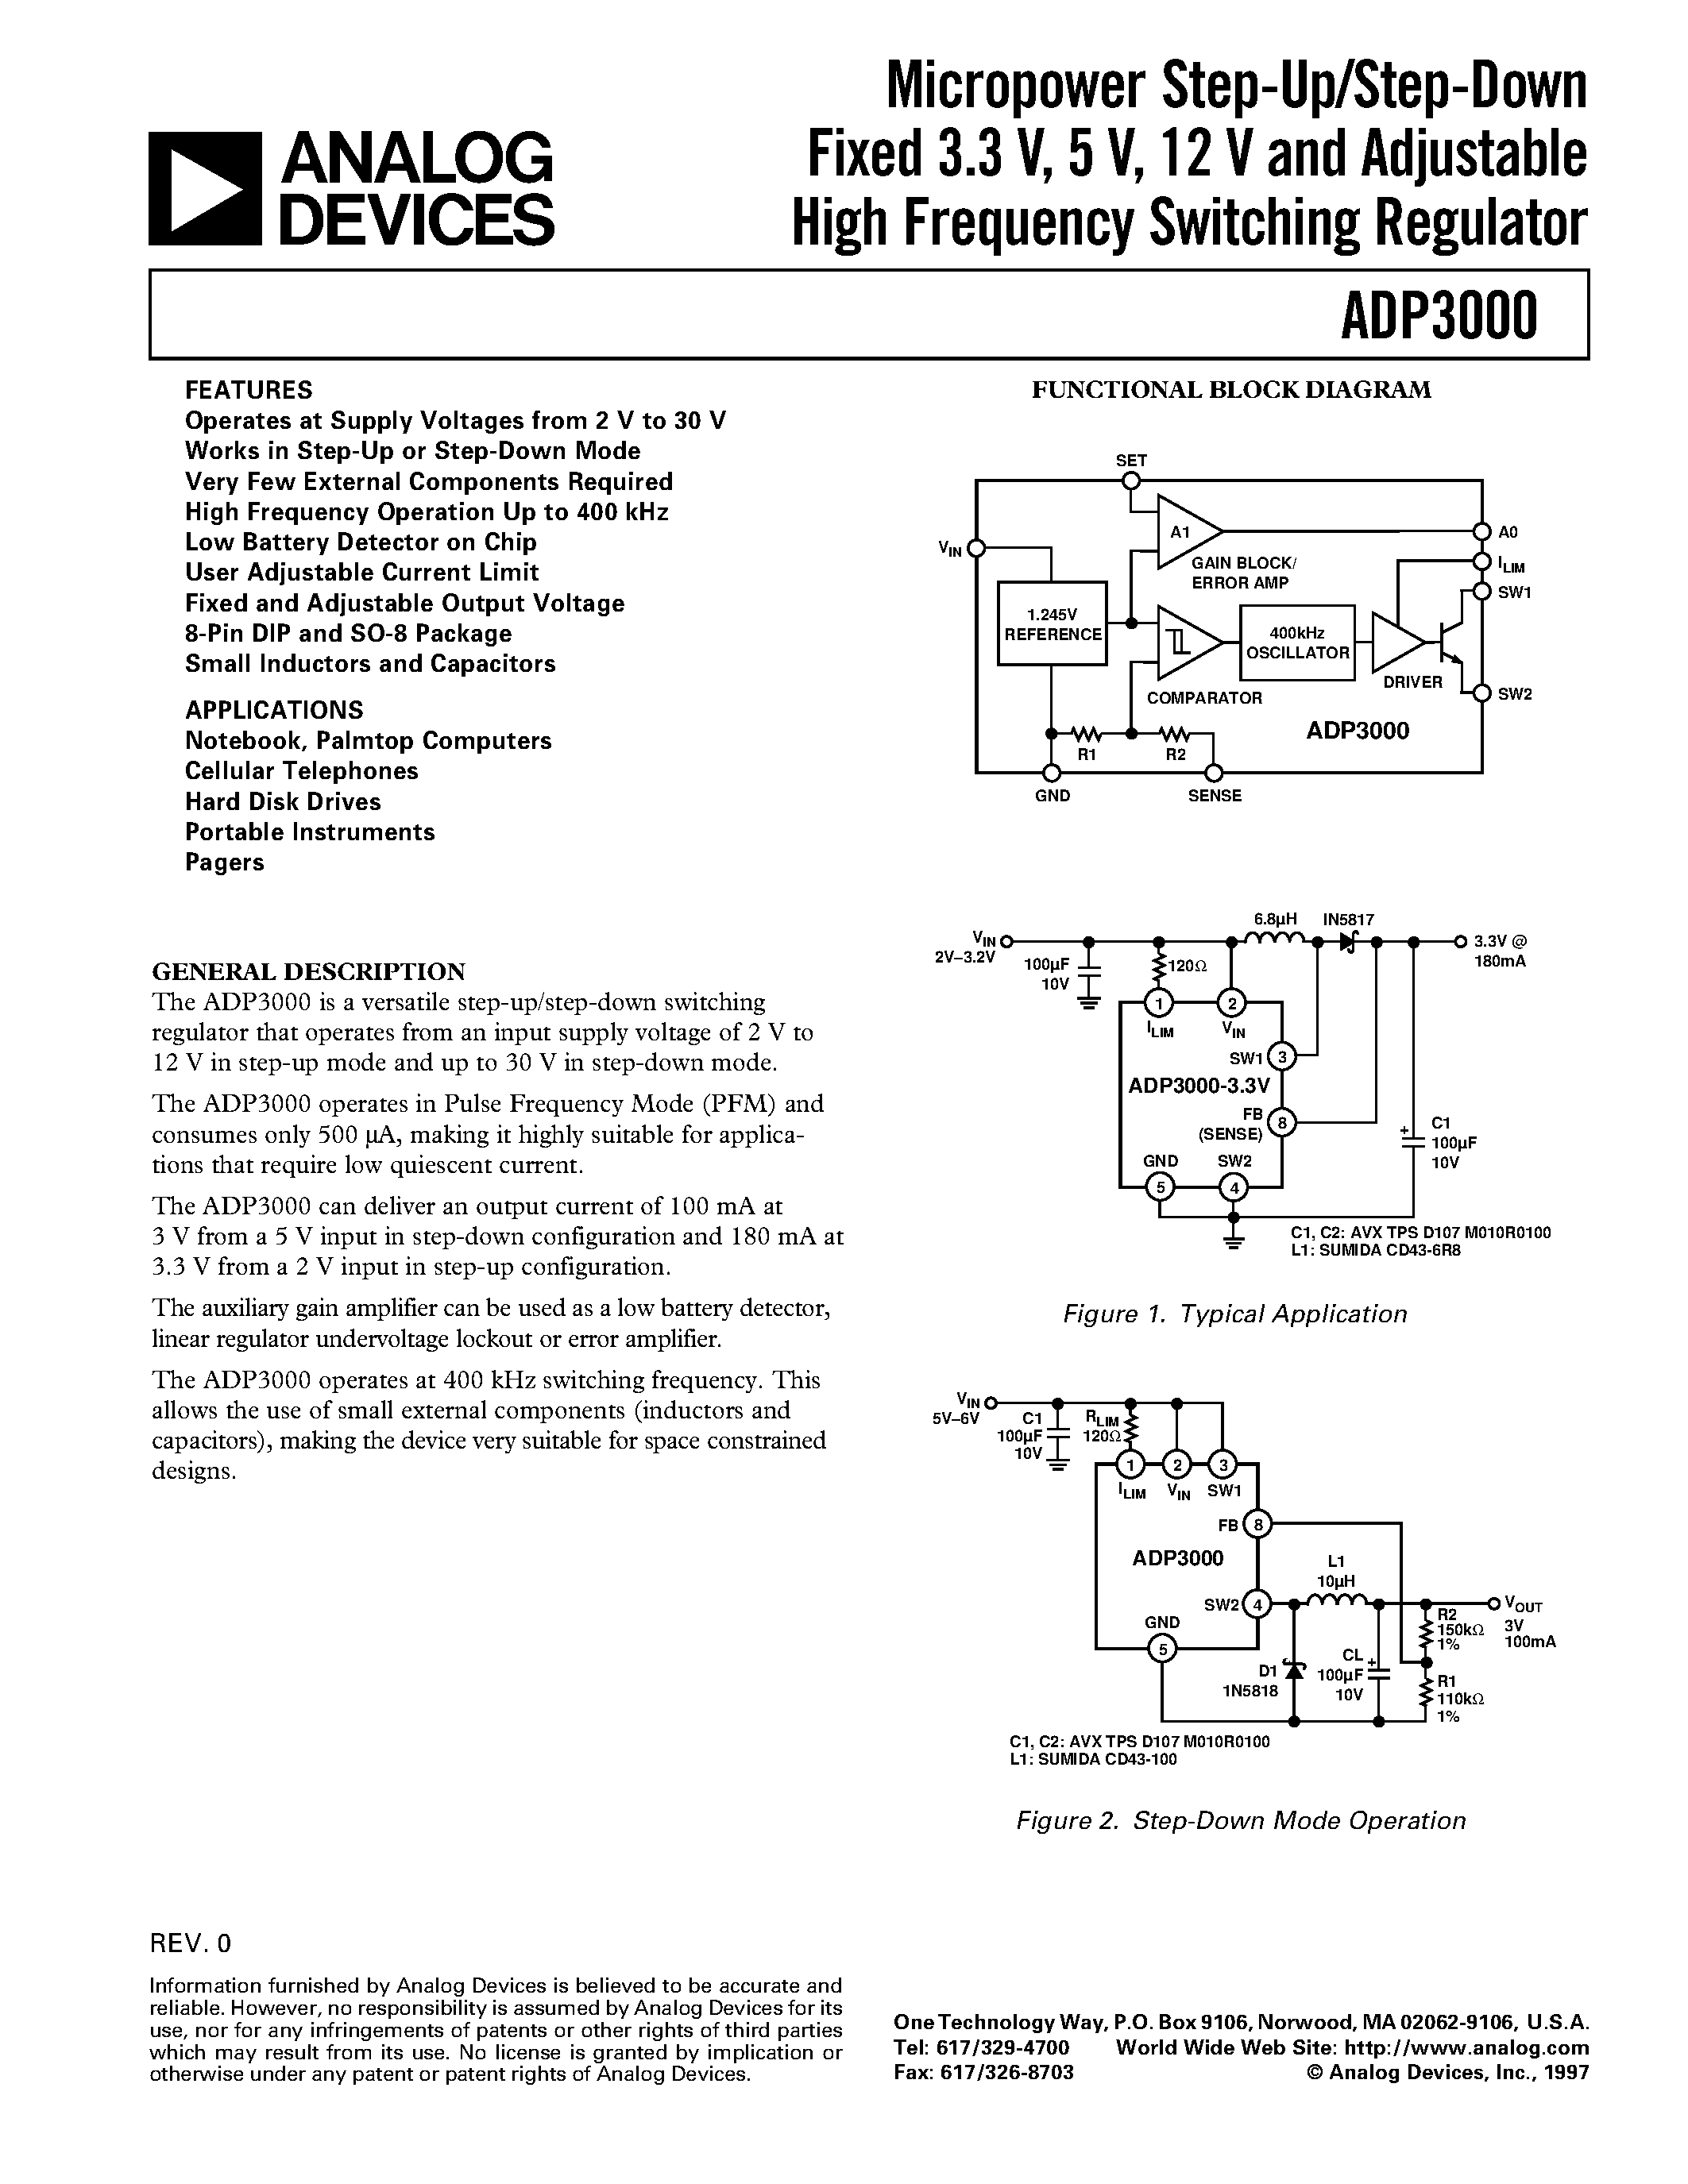 Datasheet ADP3000AR-5 - Micropower Step-Up/Step-Down Fixed 3.3 V/ 5 V/ 12 V and Adjustable High Frequency Switching Regulator page 1